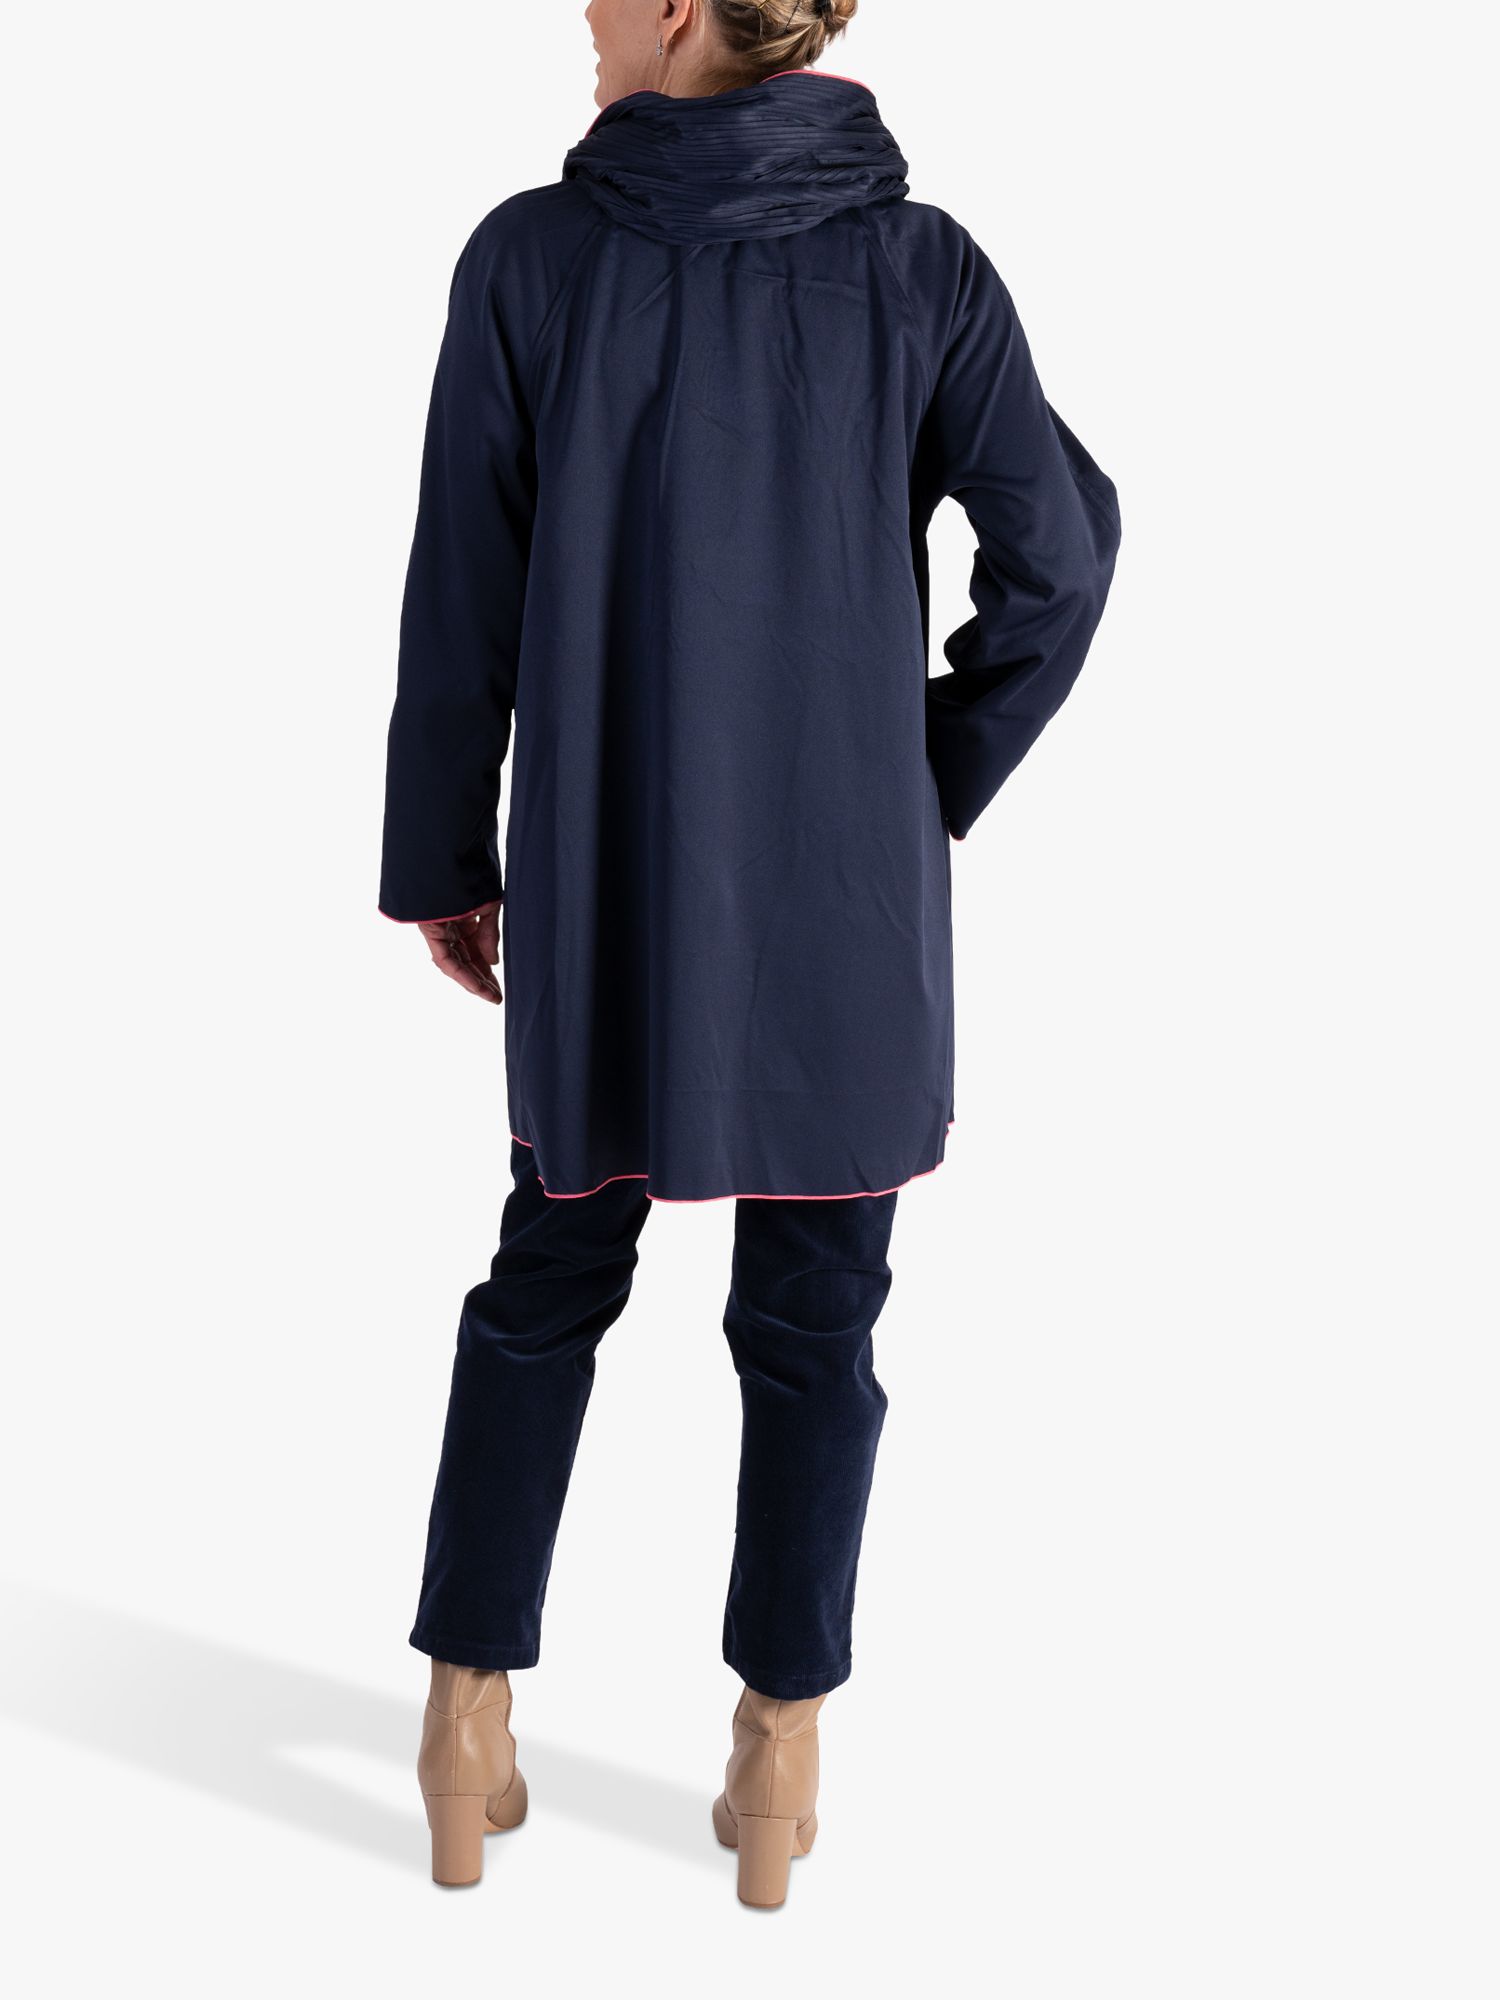 Buy chesca Piped Reversible Raincoat Online at johnlewis.com